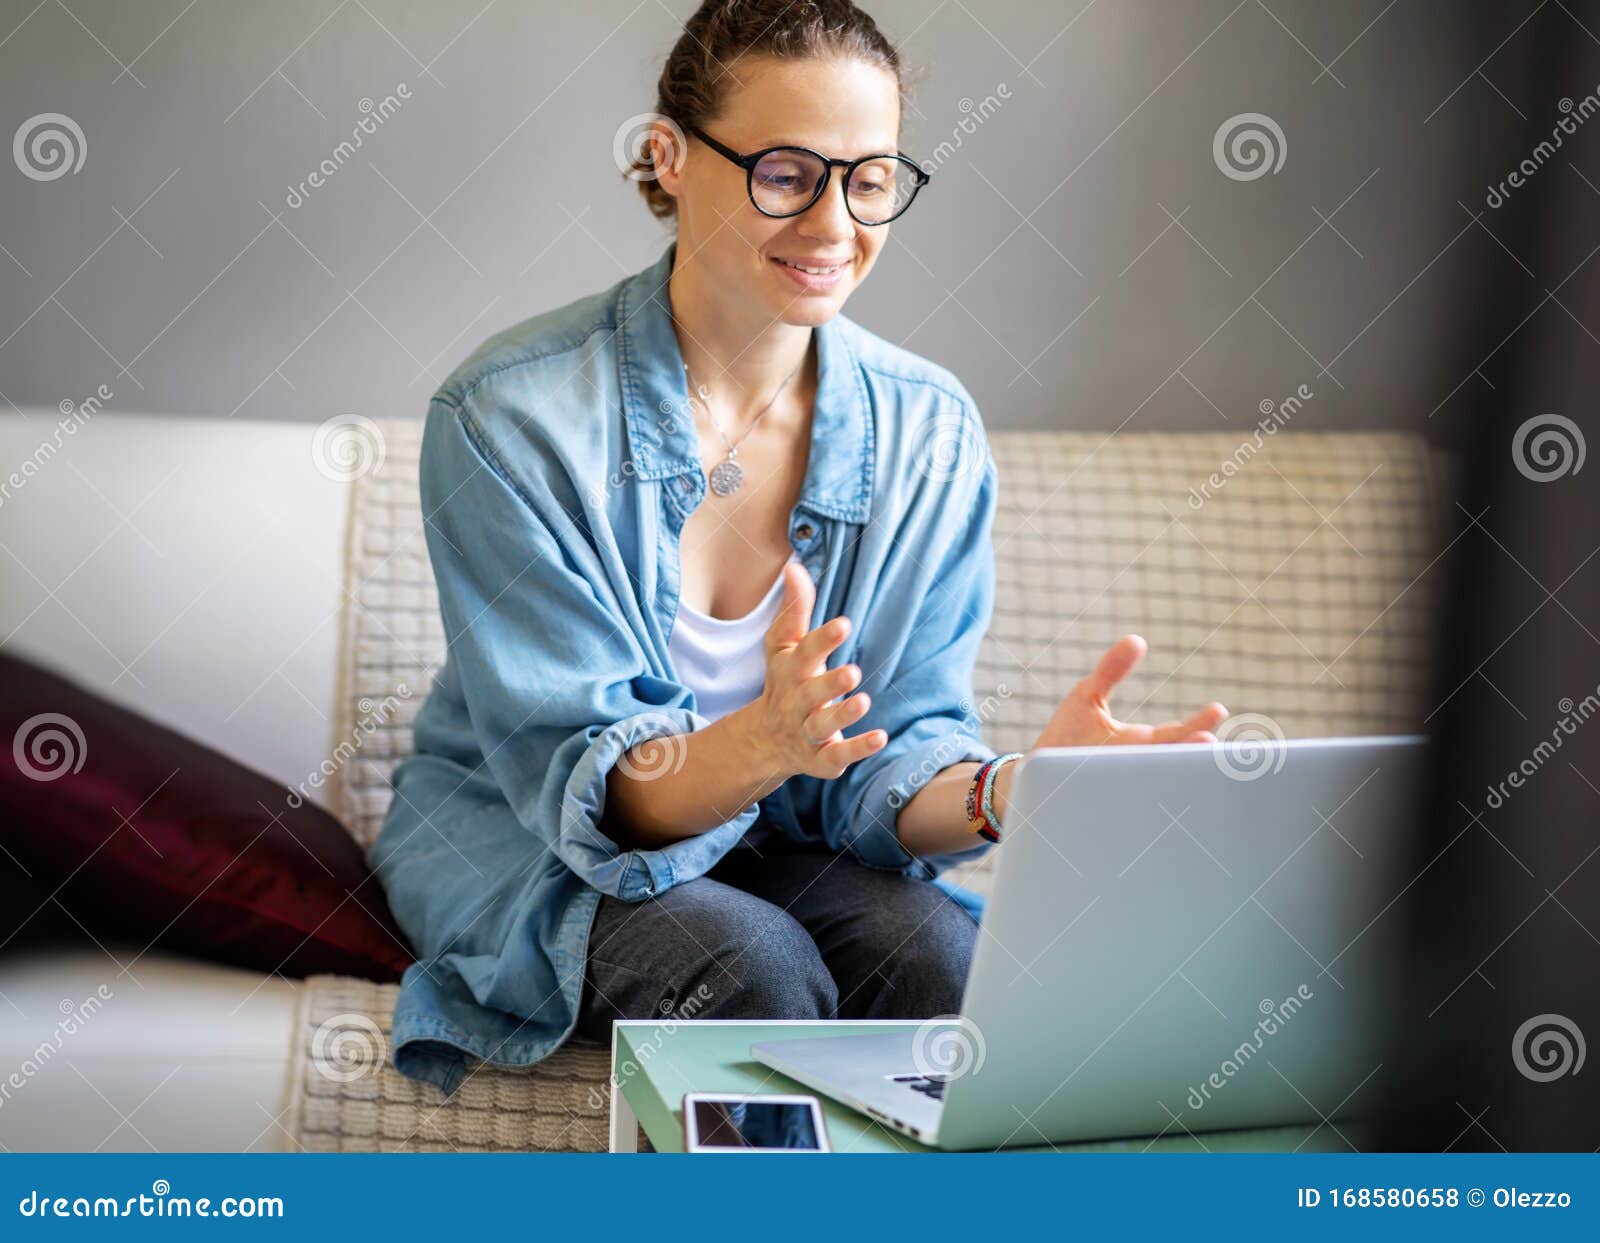 young pretty european woman with glasses psychologist coach holds an online session on the internet, remote work from home, online